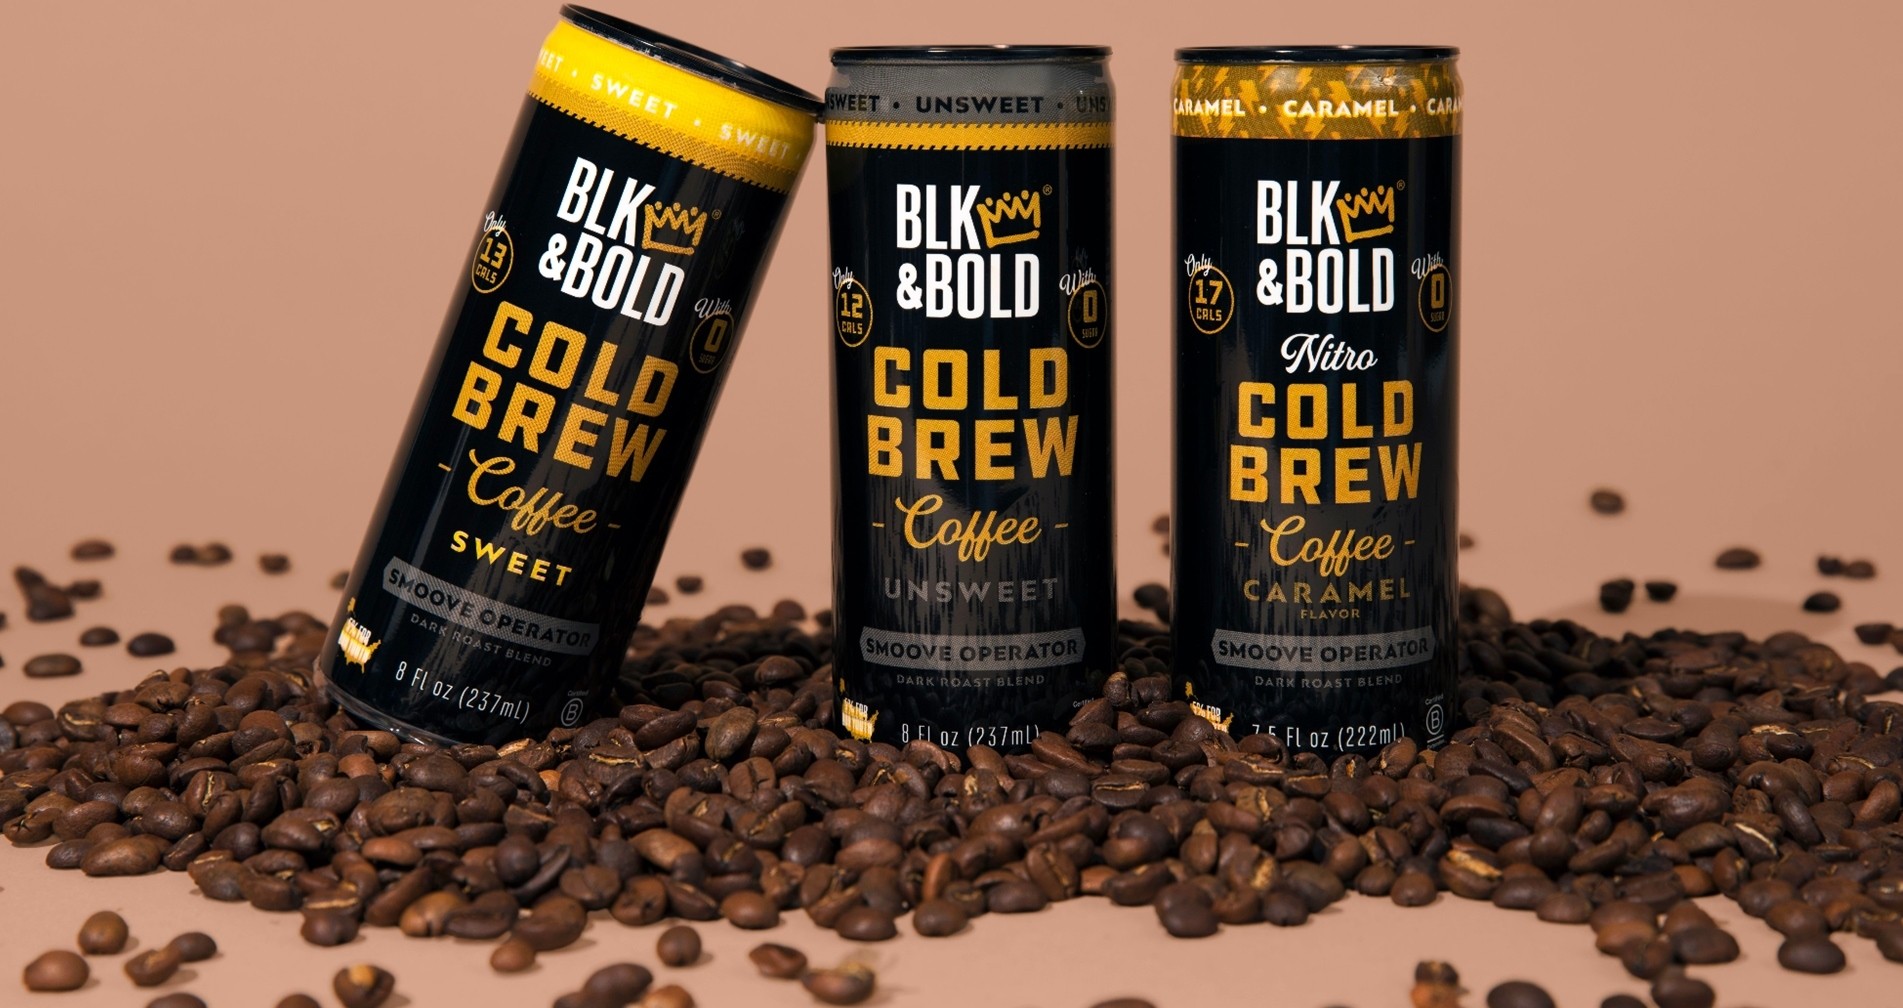 BLK & Bold Welcomes Summer With Nitro Sweet Cold Brew Flavor